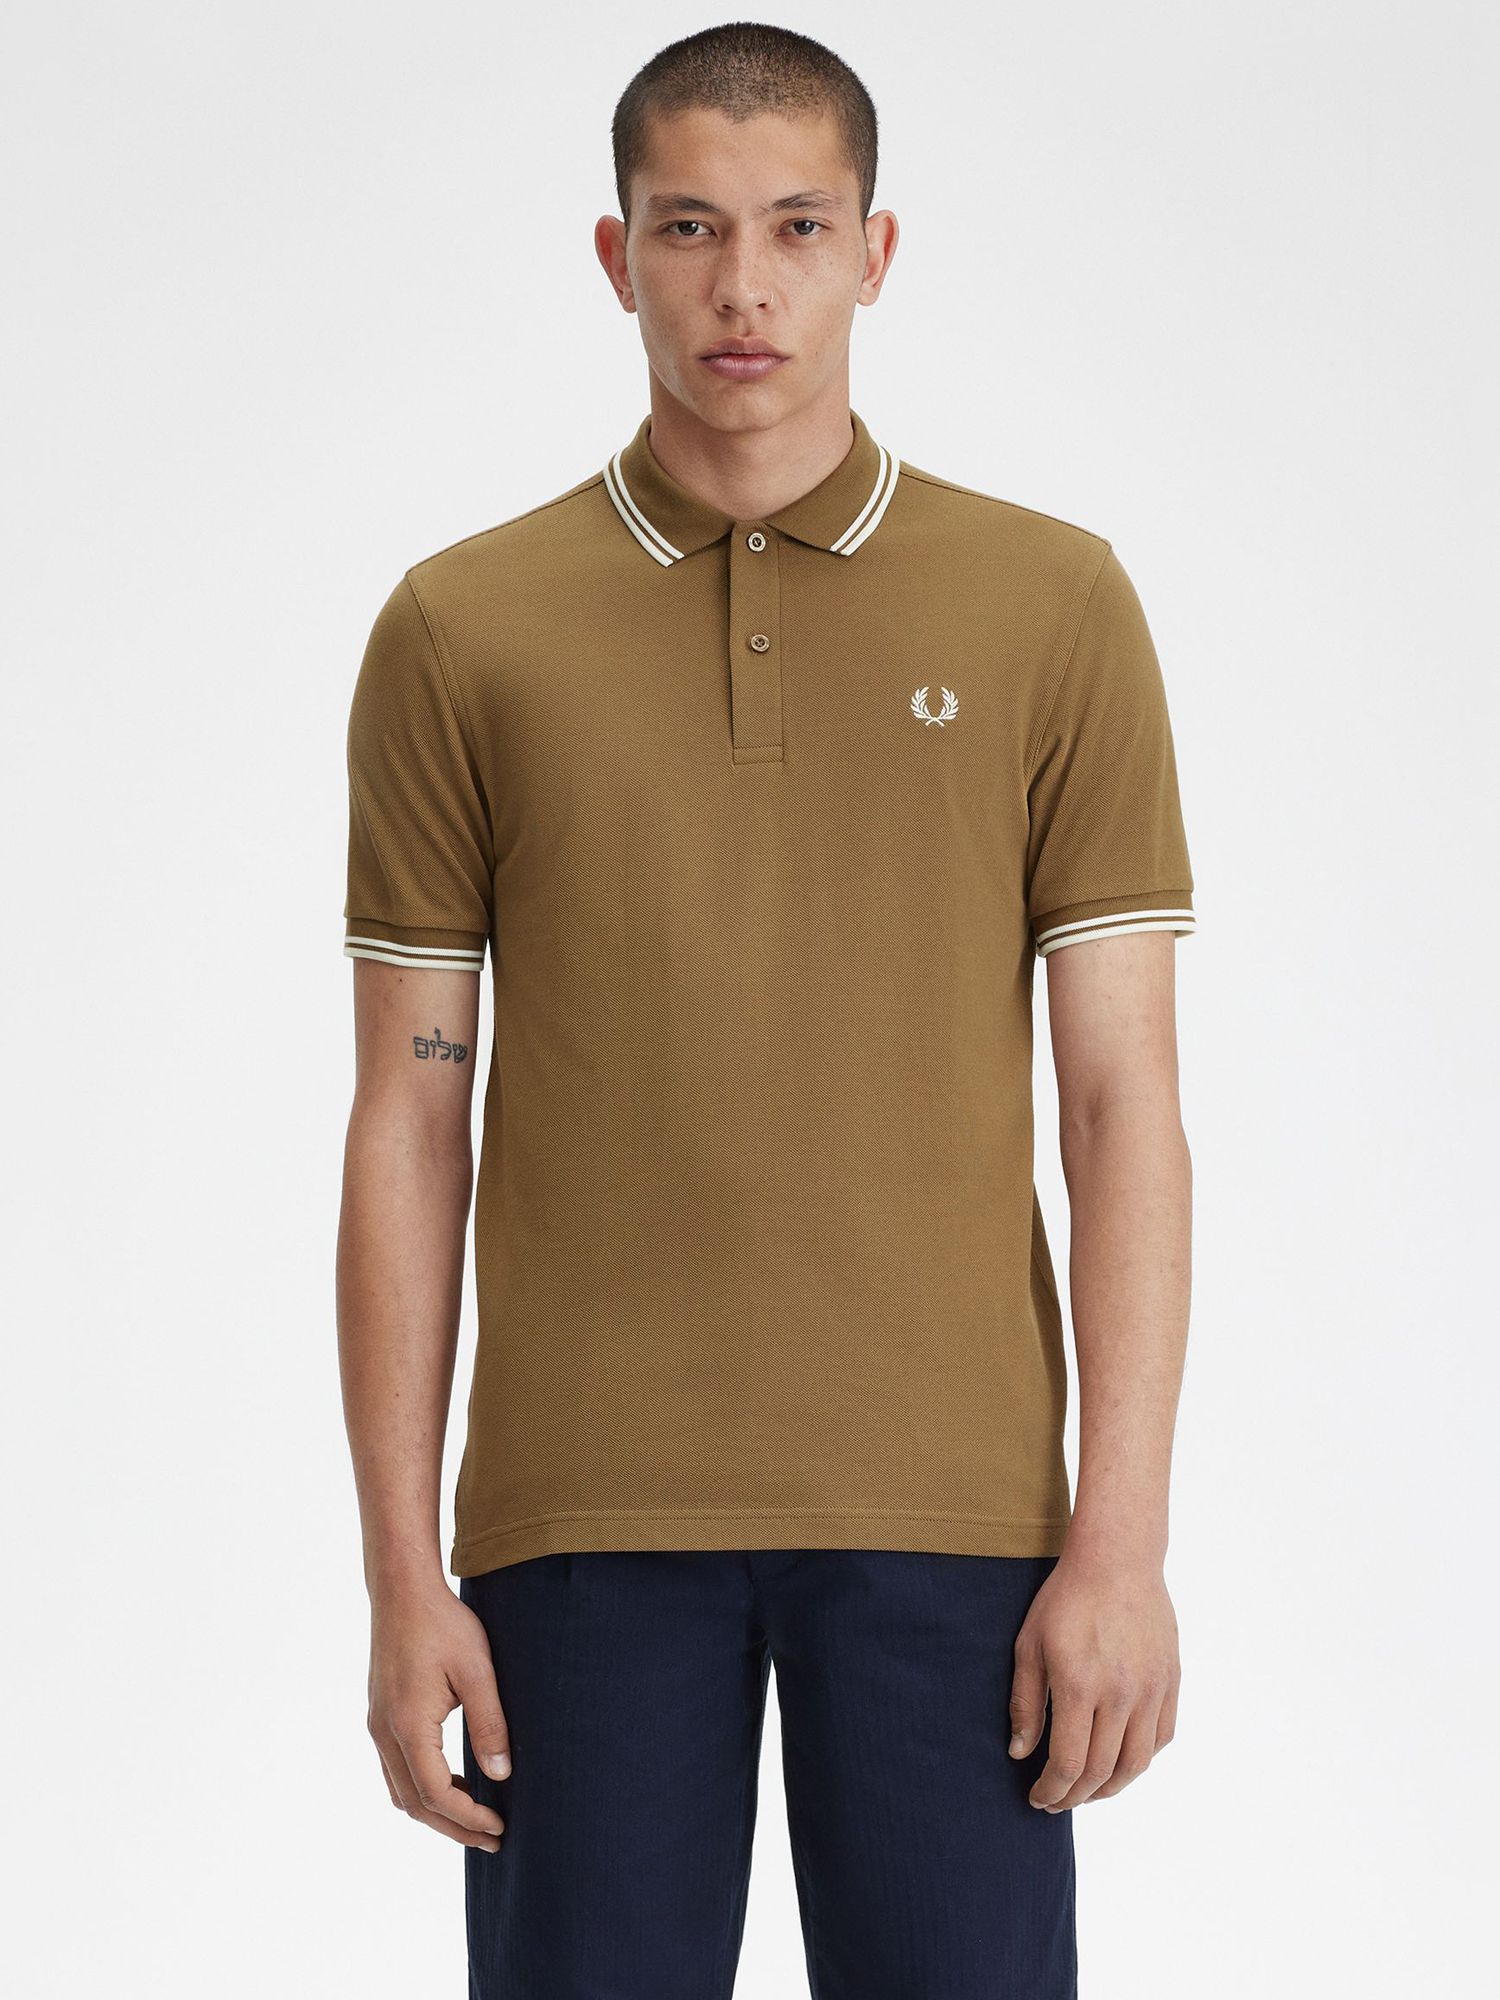 Fred Perry Twin Tipped Short Sleeve Polo Shirt, Brown/Ecru, M